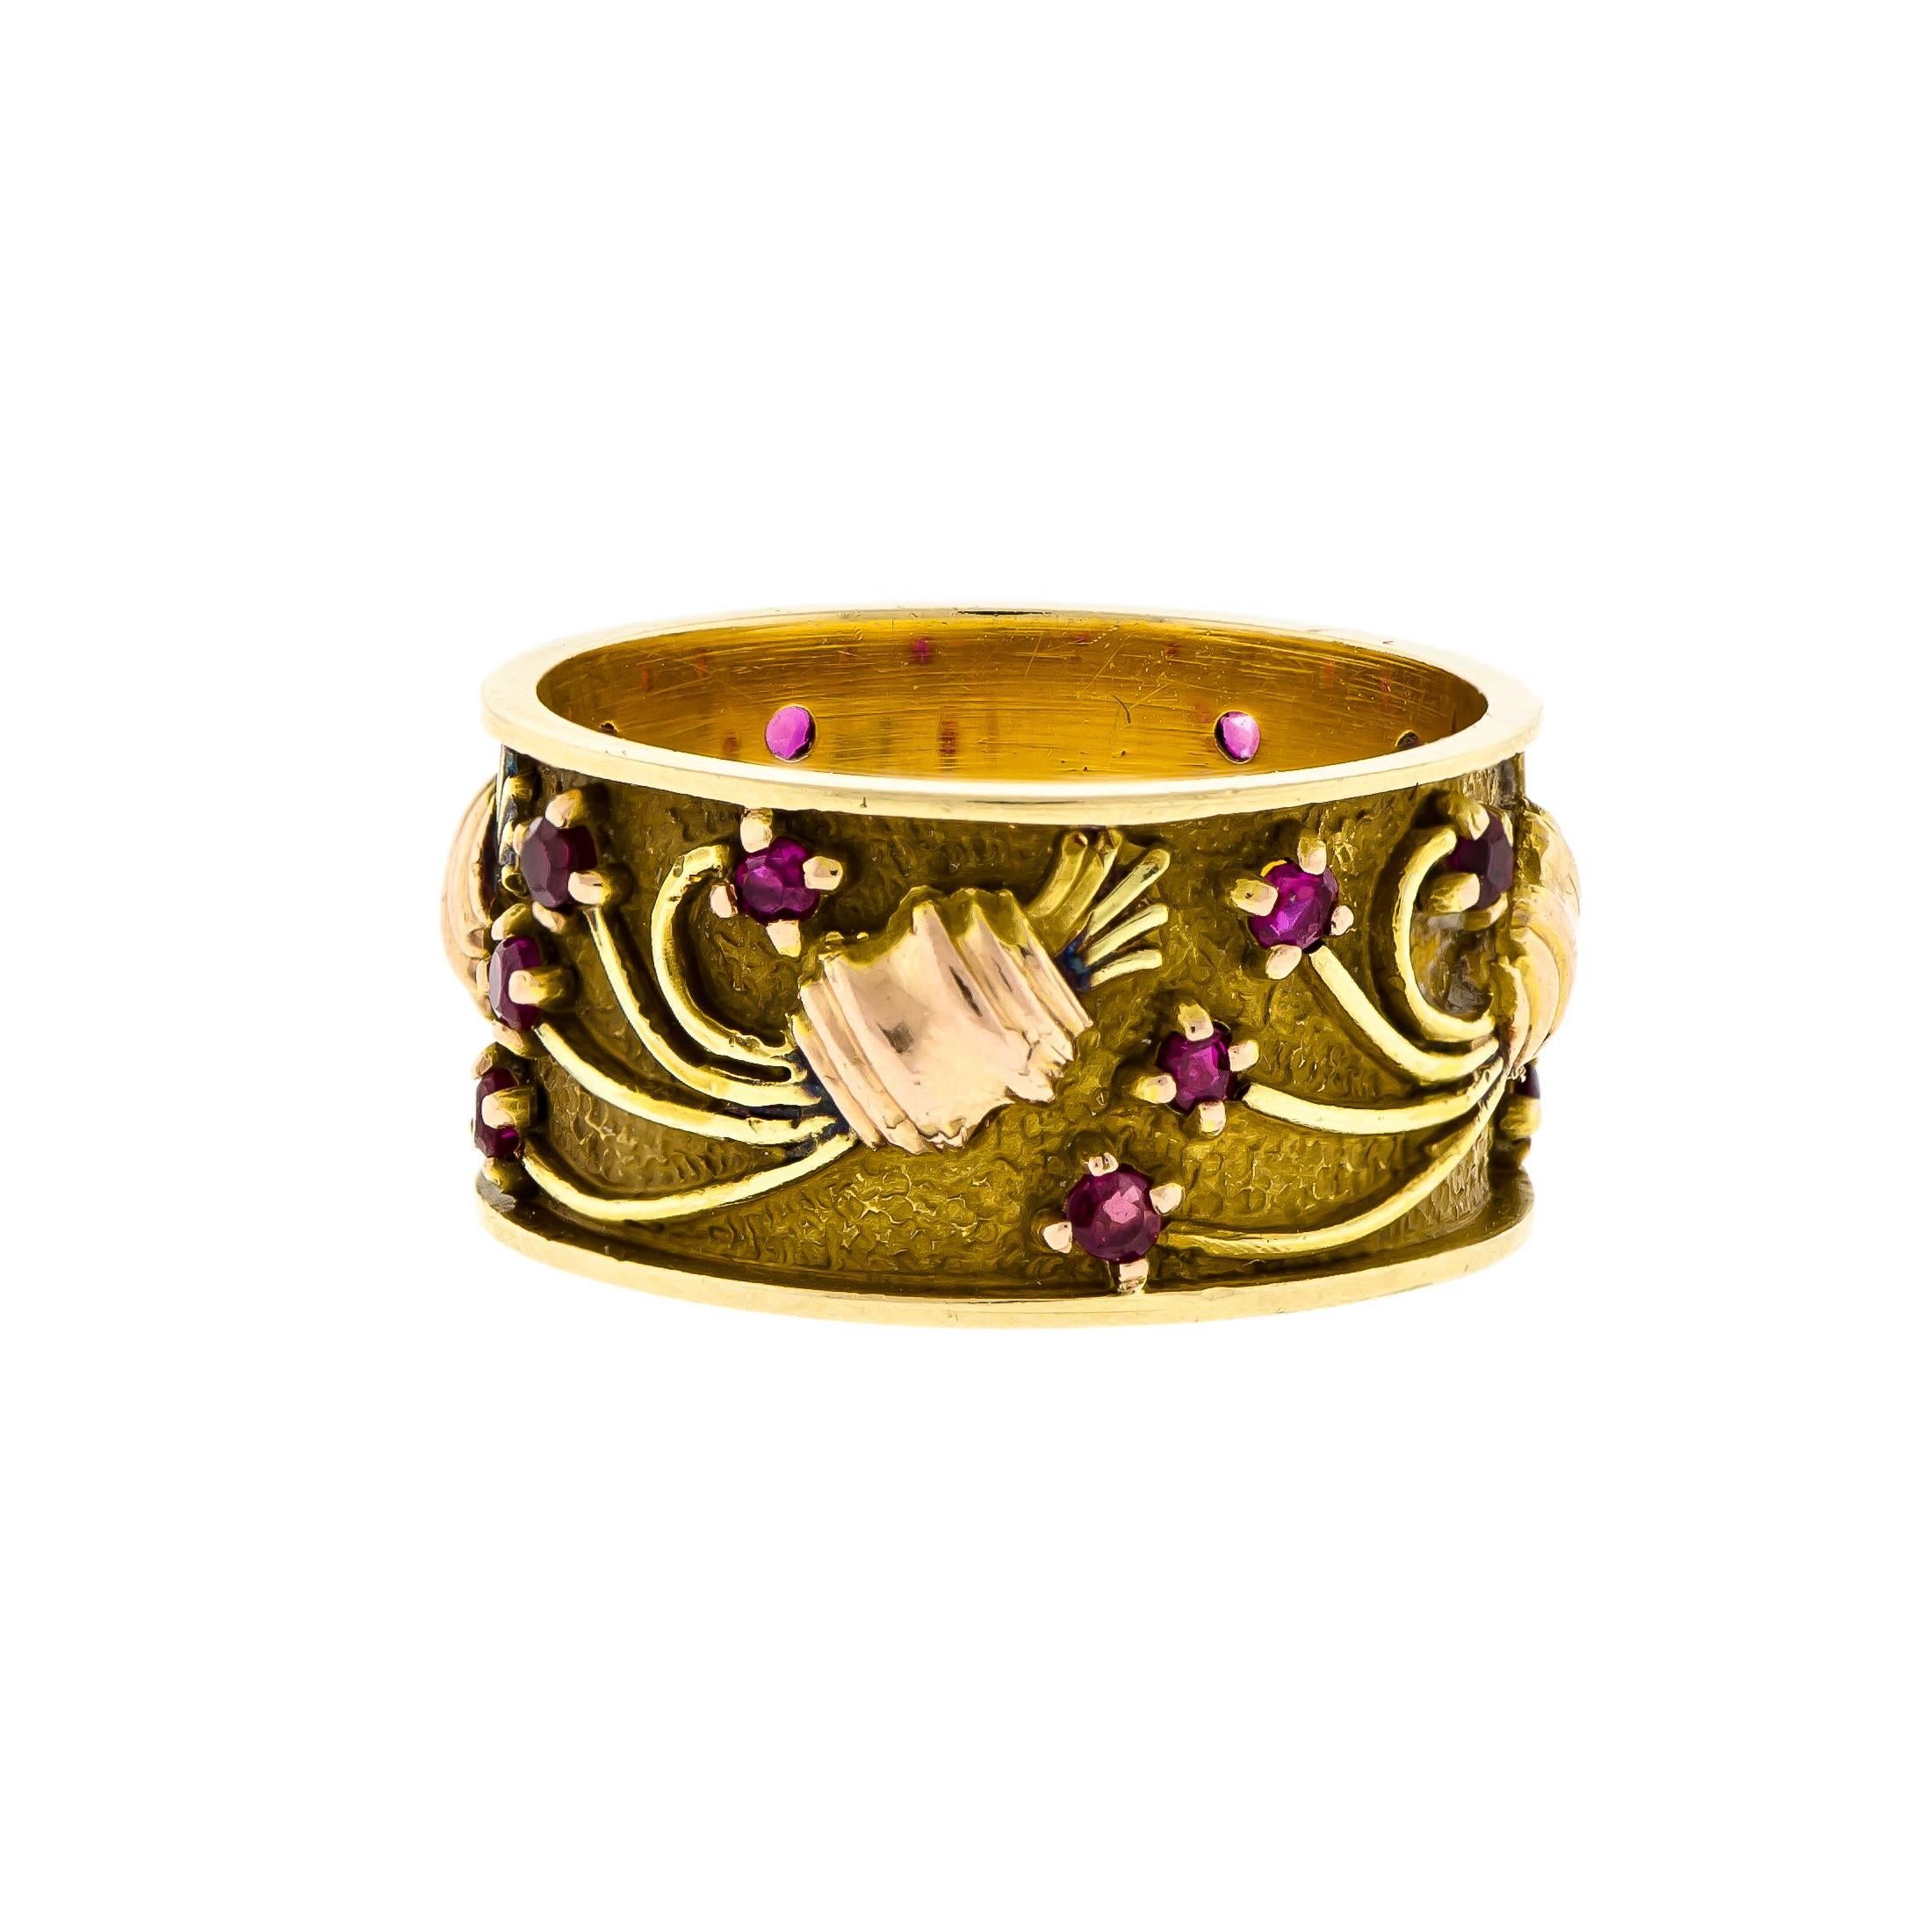 Wonderful Retro Circa 1935 tri-color, gold, green, pink, gold and ruby (mix of natural and synthetic) ruby wide wedding band - exquisite details - raised goldwork design  set with small round rubies (mix natural and synthetic which was common